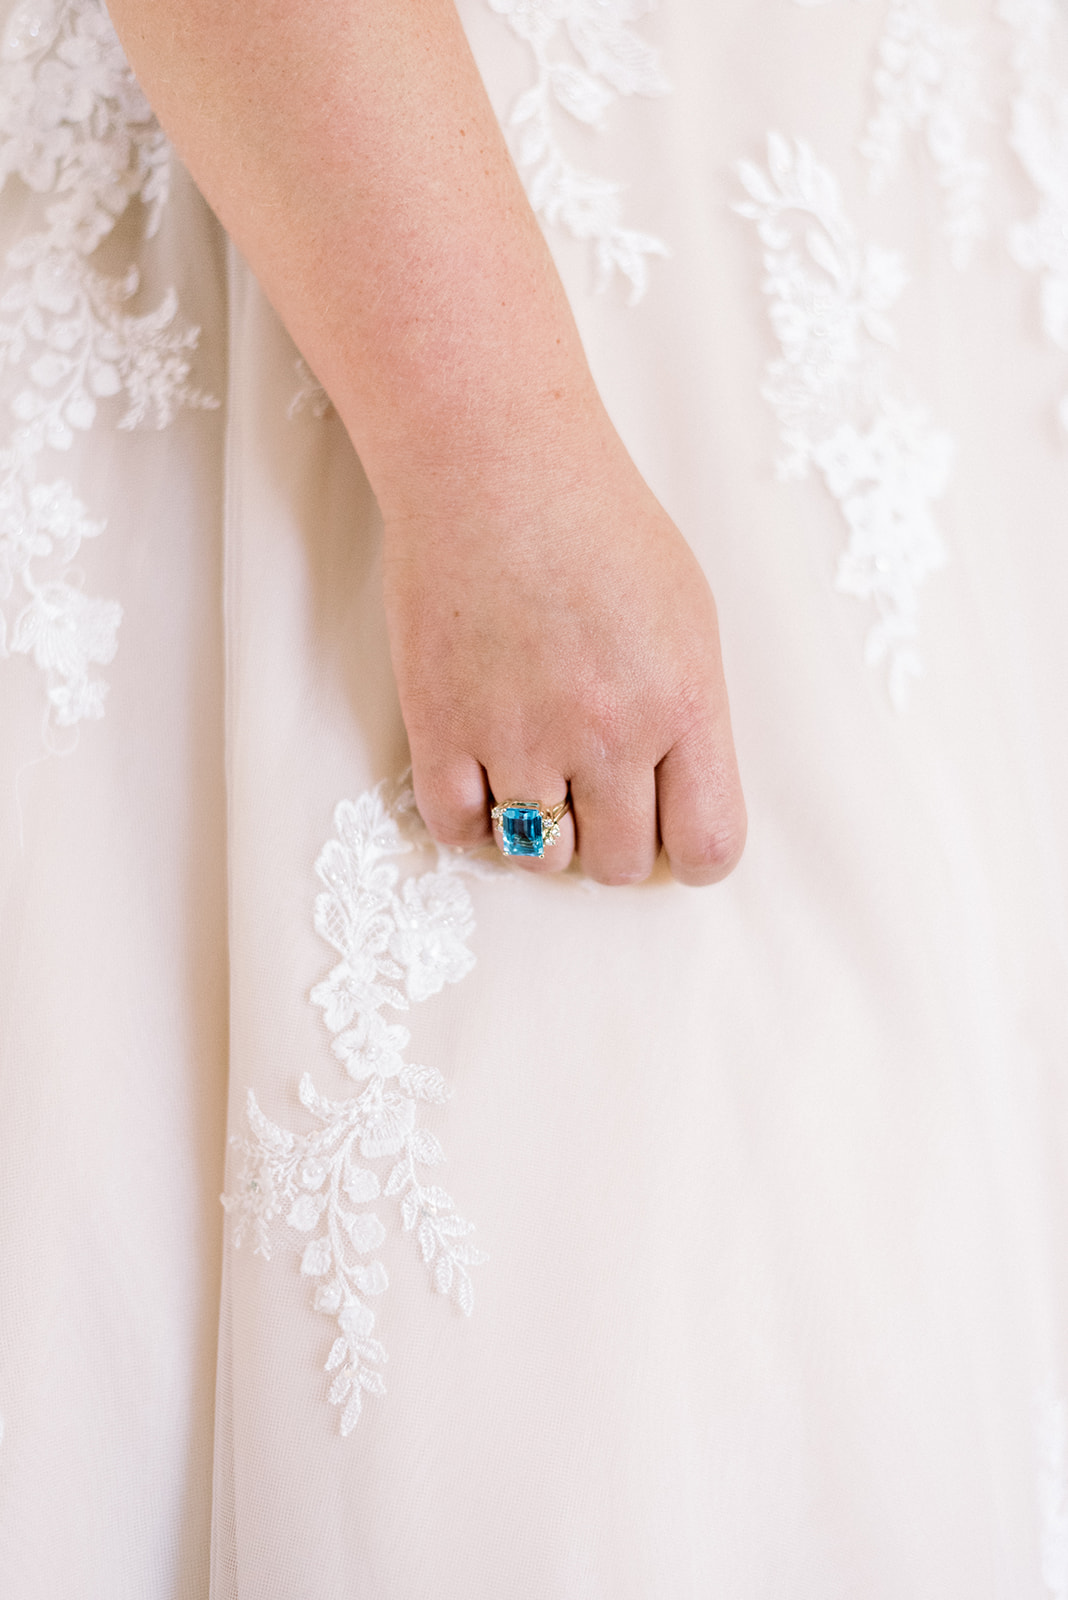 Pennsylvania wedding photographer captures bride's hand with ring on it